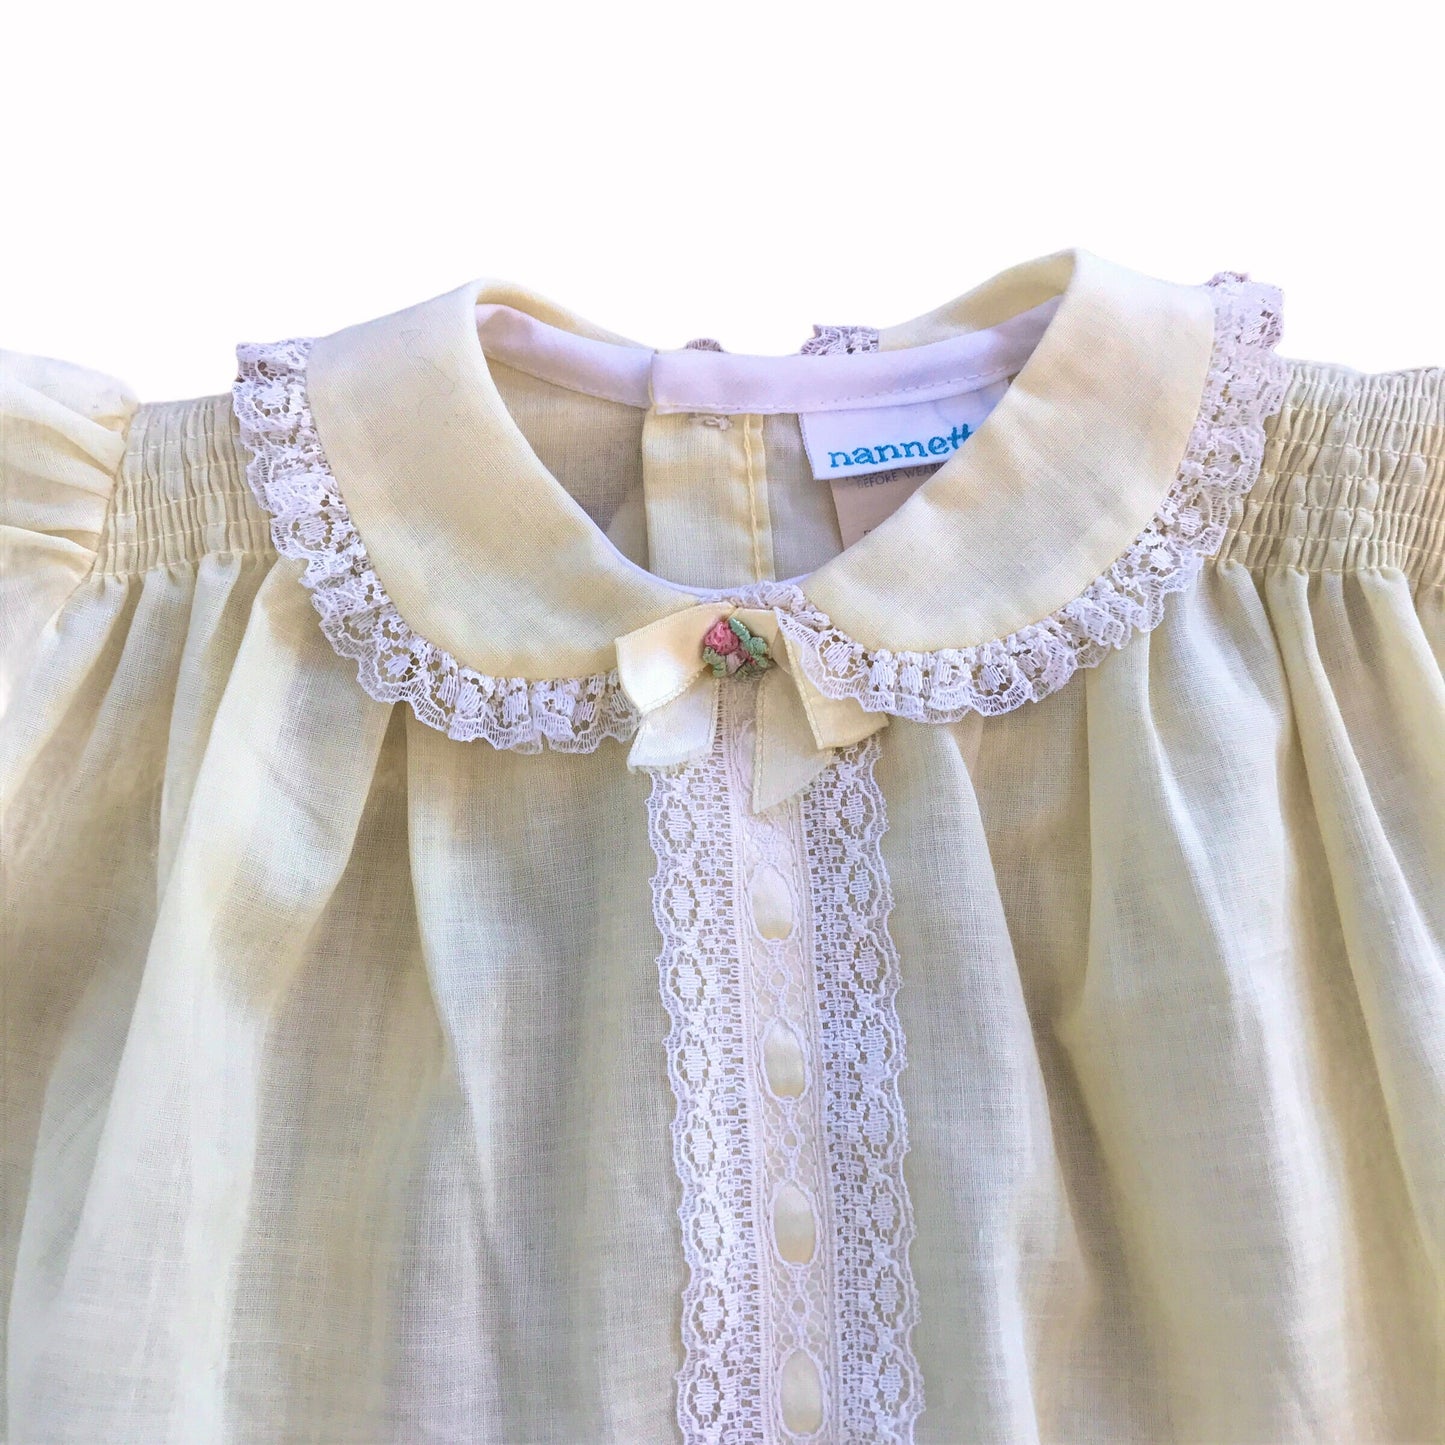 Vintage 1960s White / Pale Yellow Dress  British  Made 9-12 Months